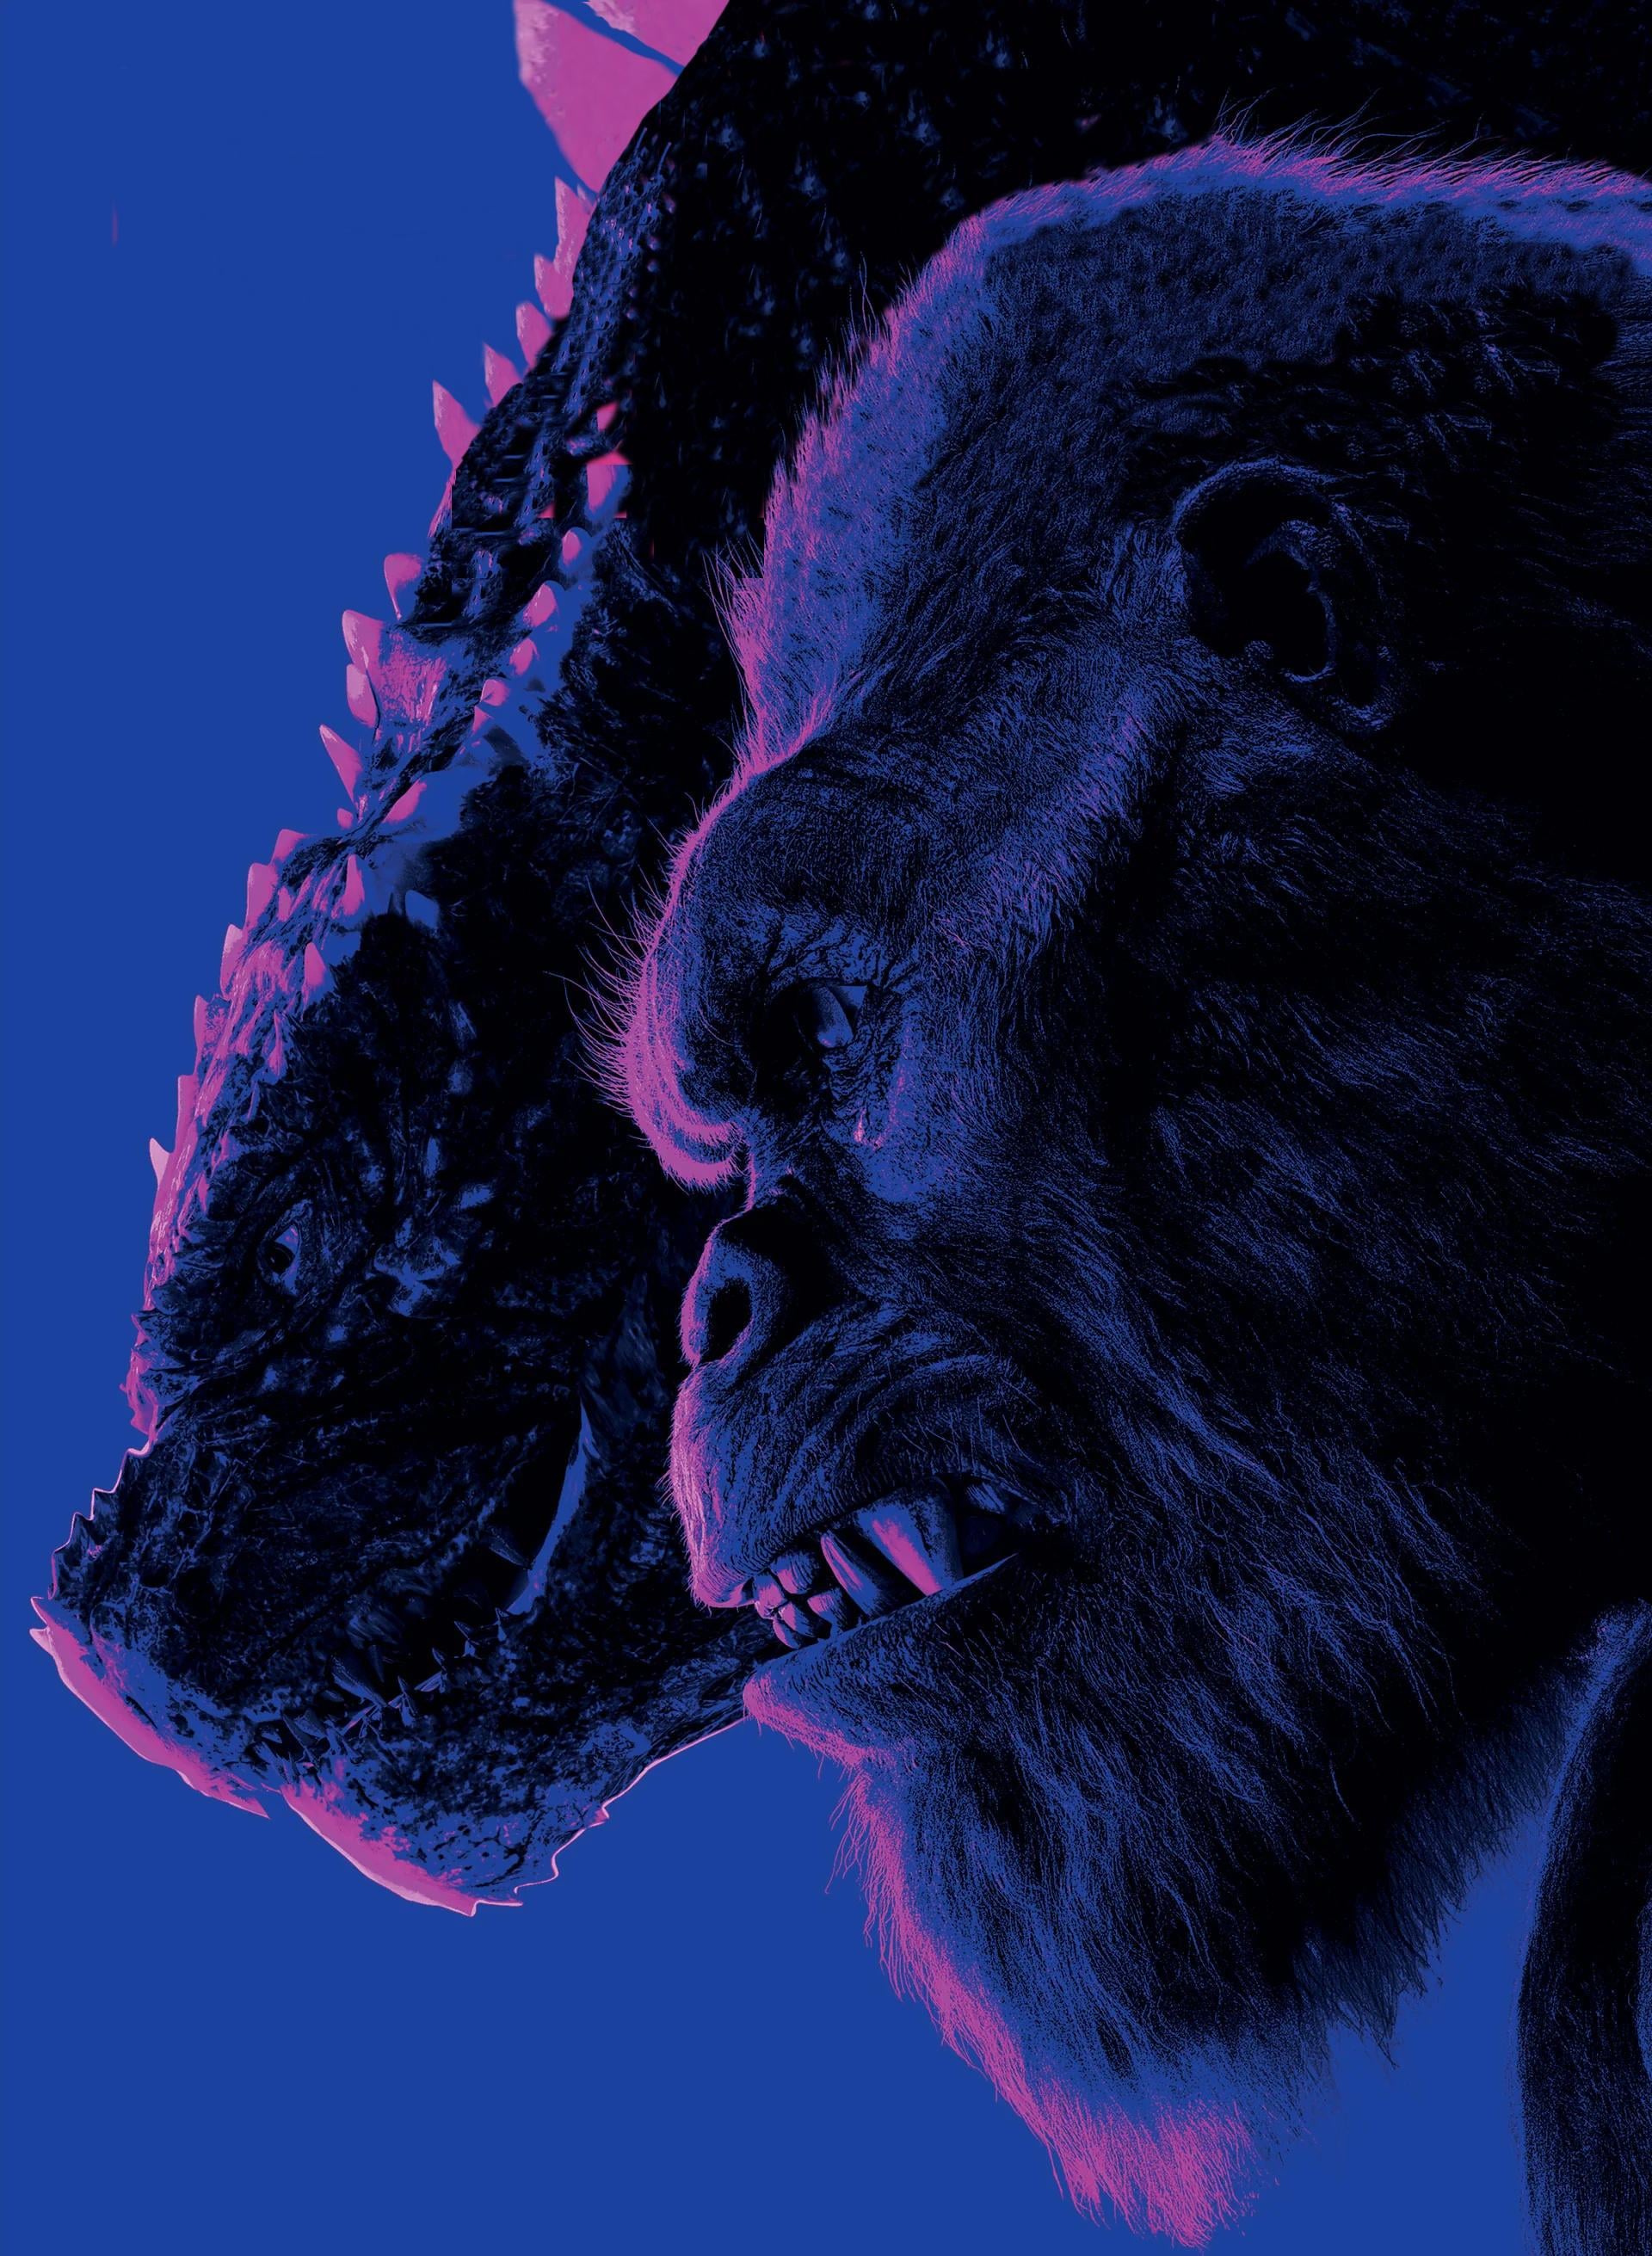 Godzilla x Kong: The New Empire wallpaper Resolution 1920x2622 | Best Download this awesome wallpaper - Cool Wallpaper HD - CoolWallpaper-HD.com